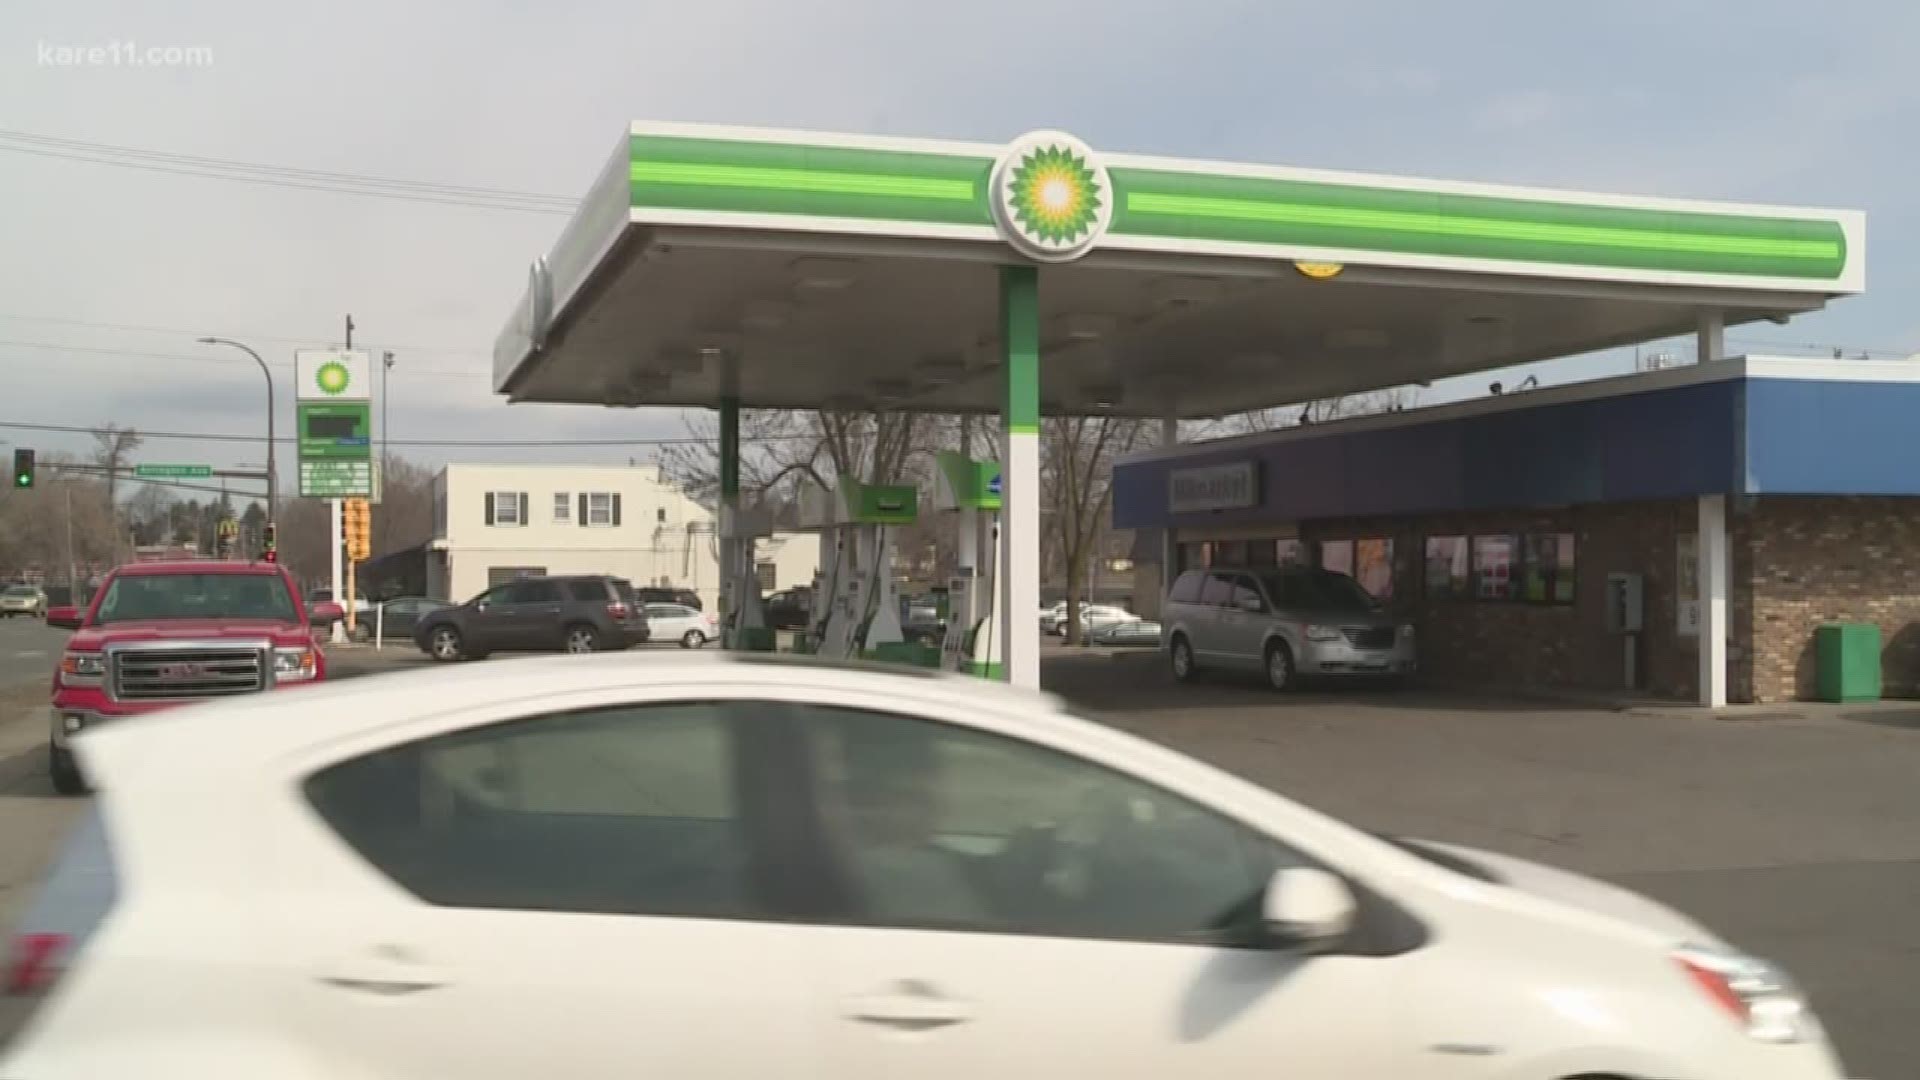 Minnesota House Democrats offered up a state transportation plan asking for an increase of 20 cents per gallon.